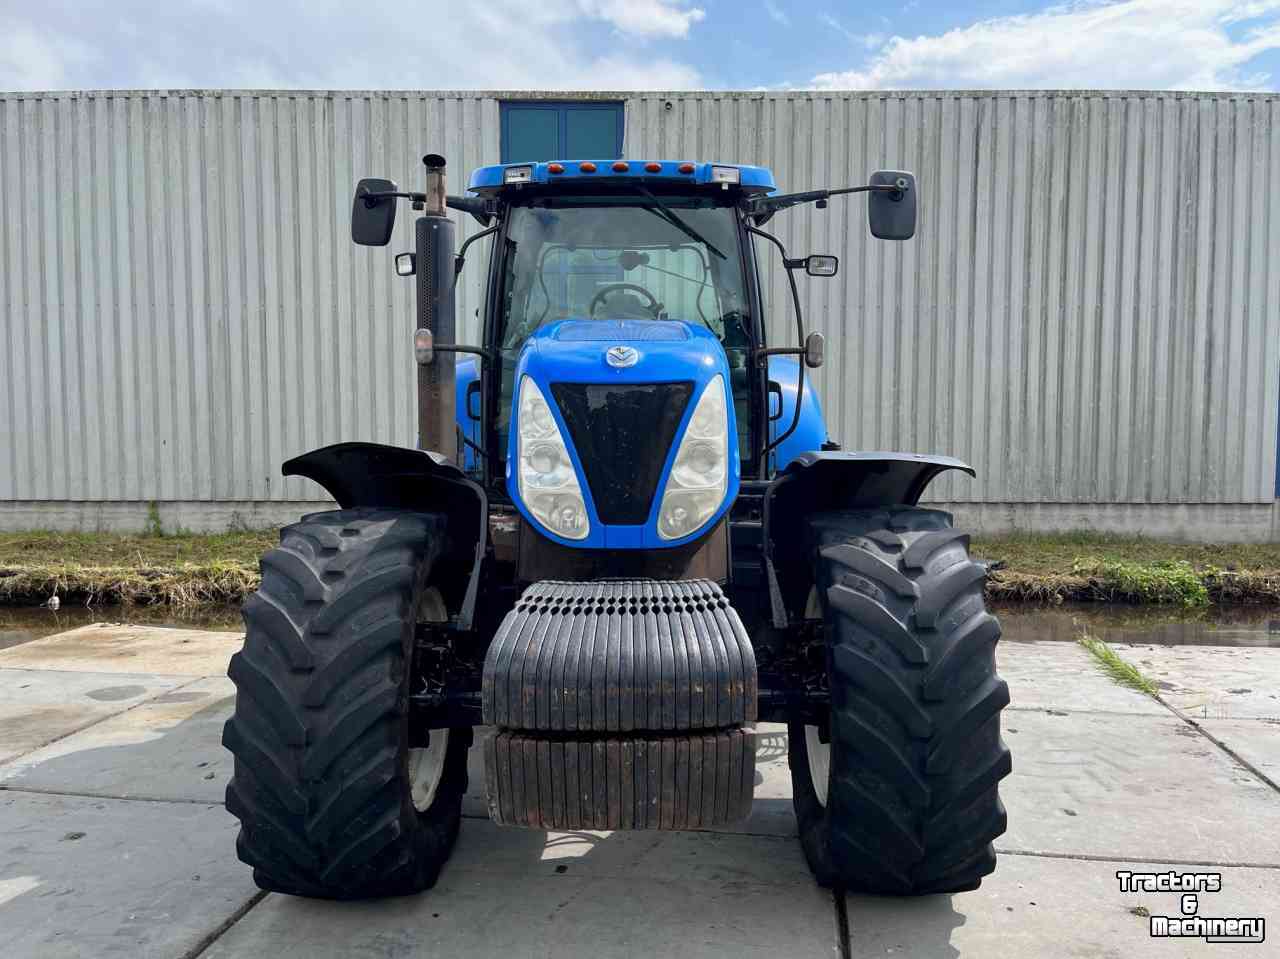 Tracteurs New Holland T7040 PC